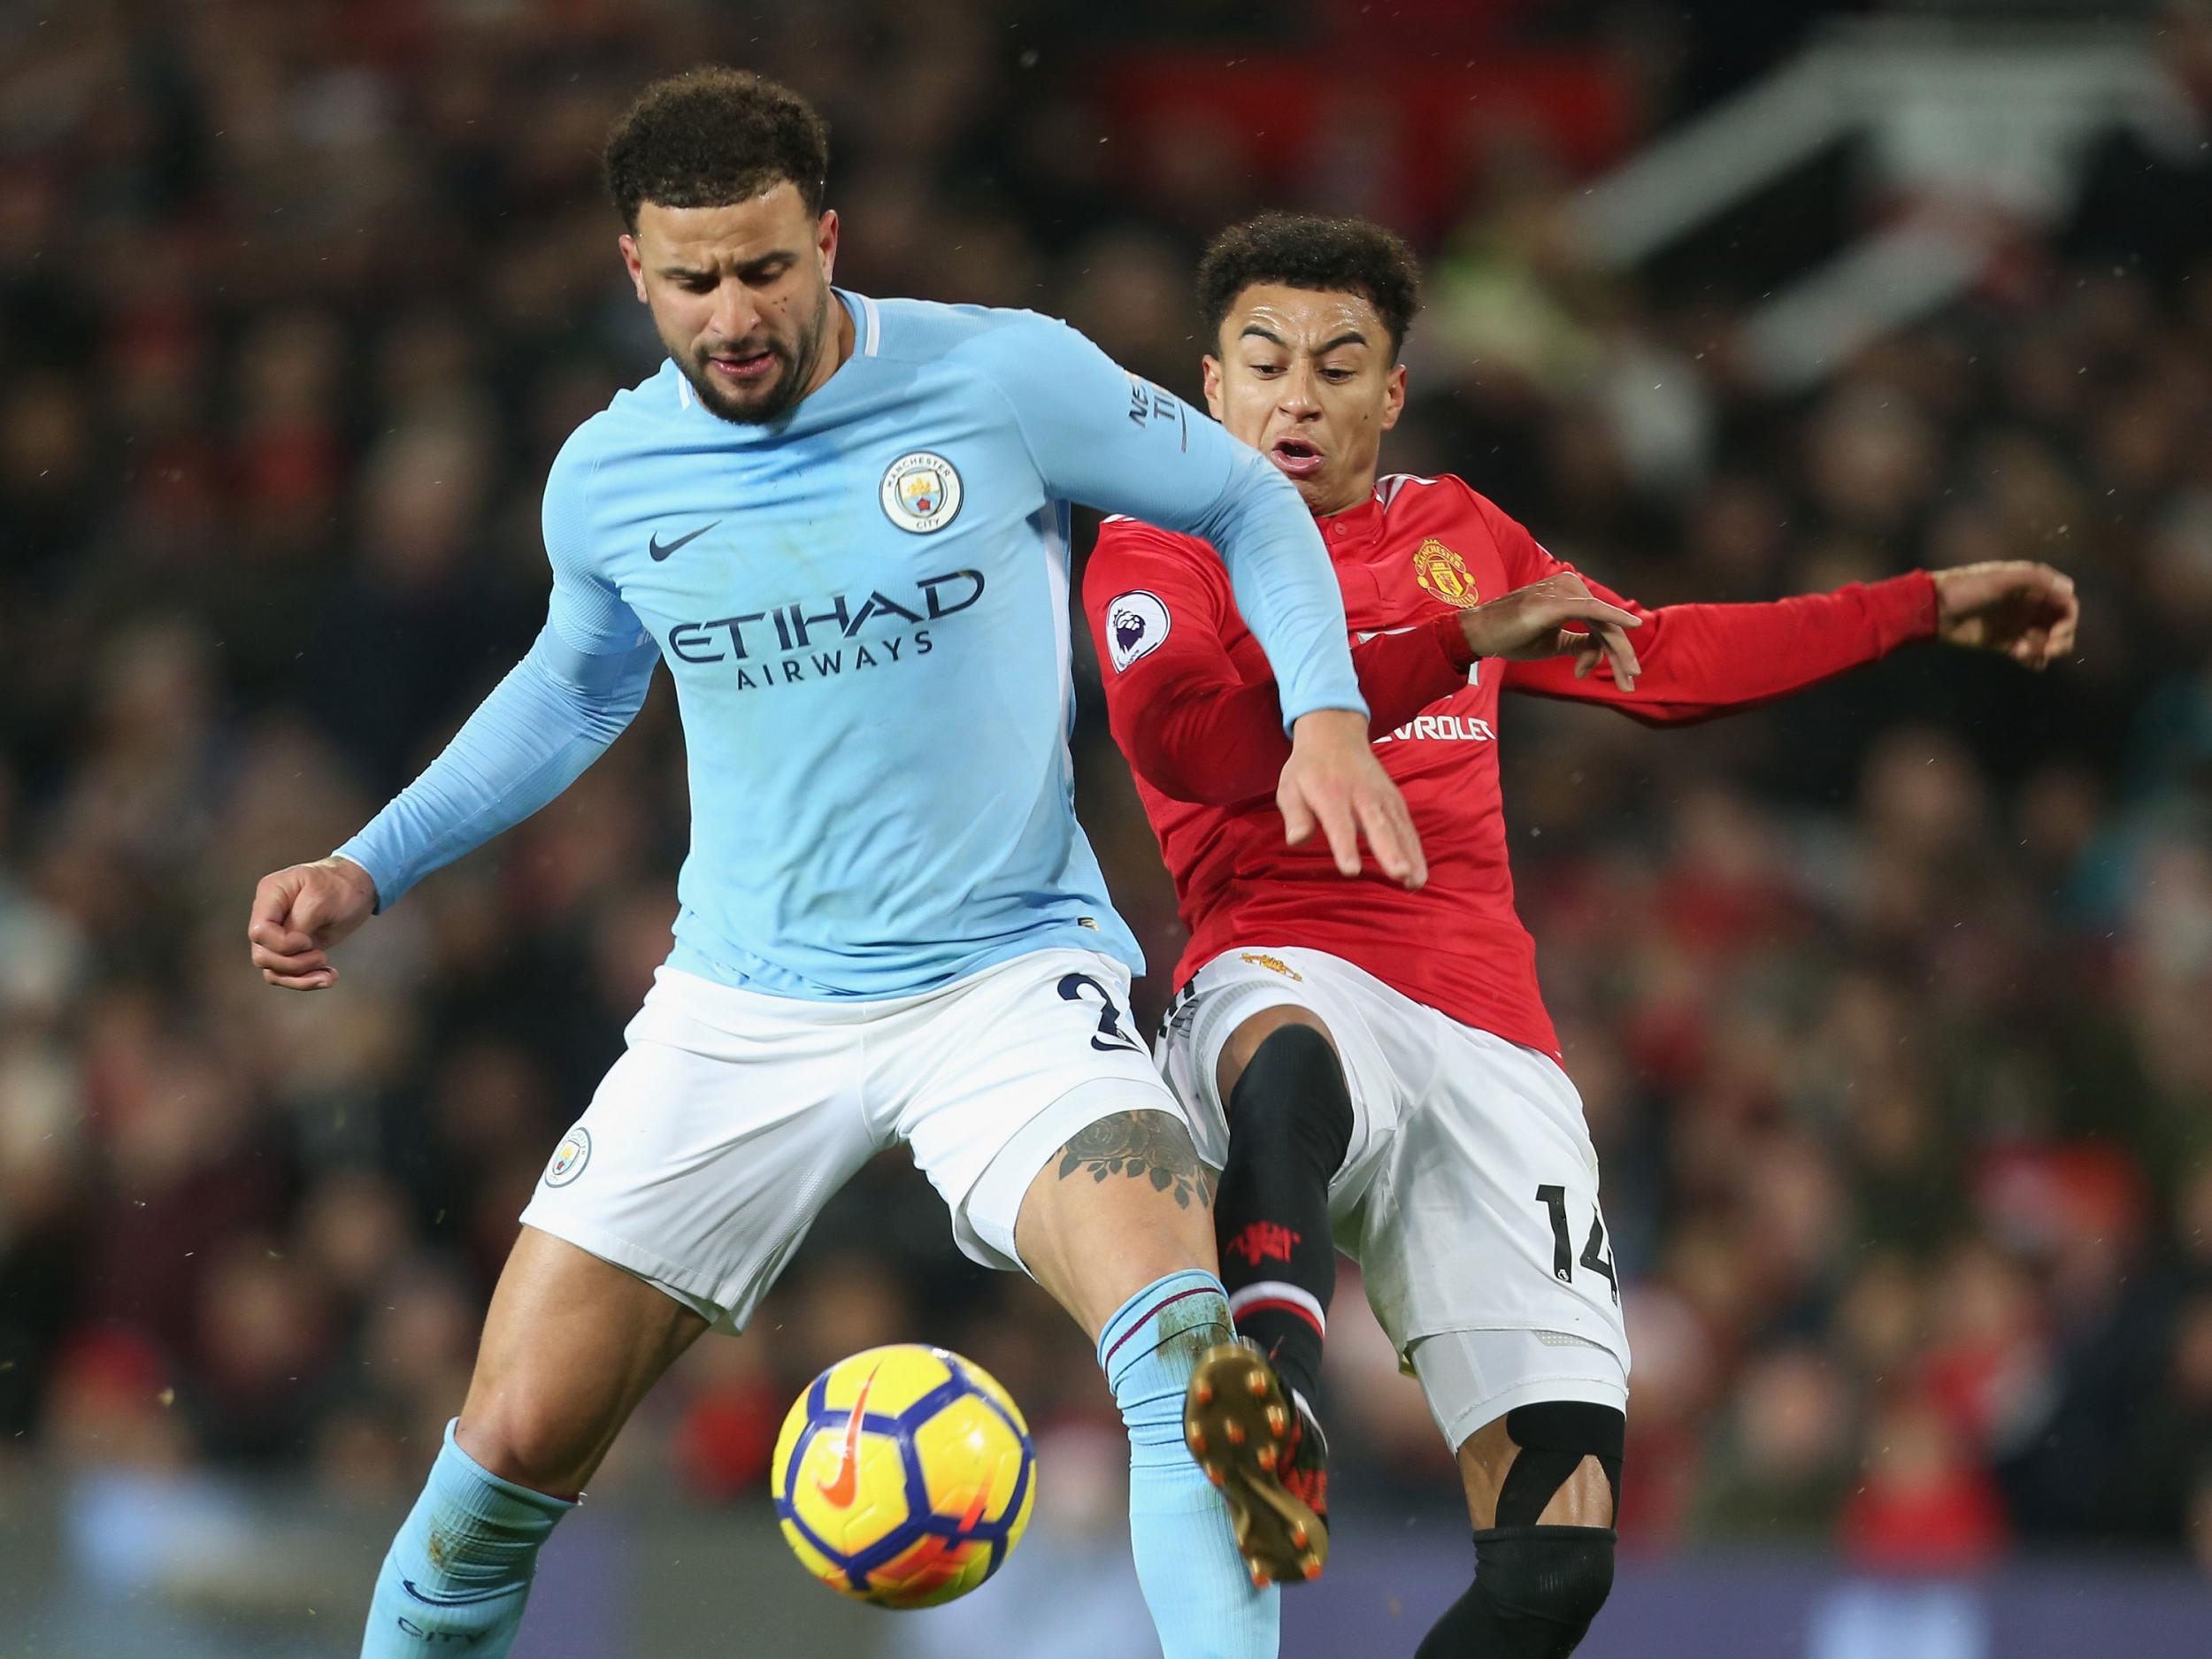 Kyle Walker has established himself as Manchester City's first-choice right-back